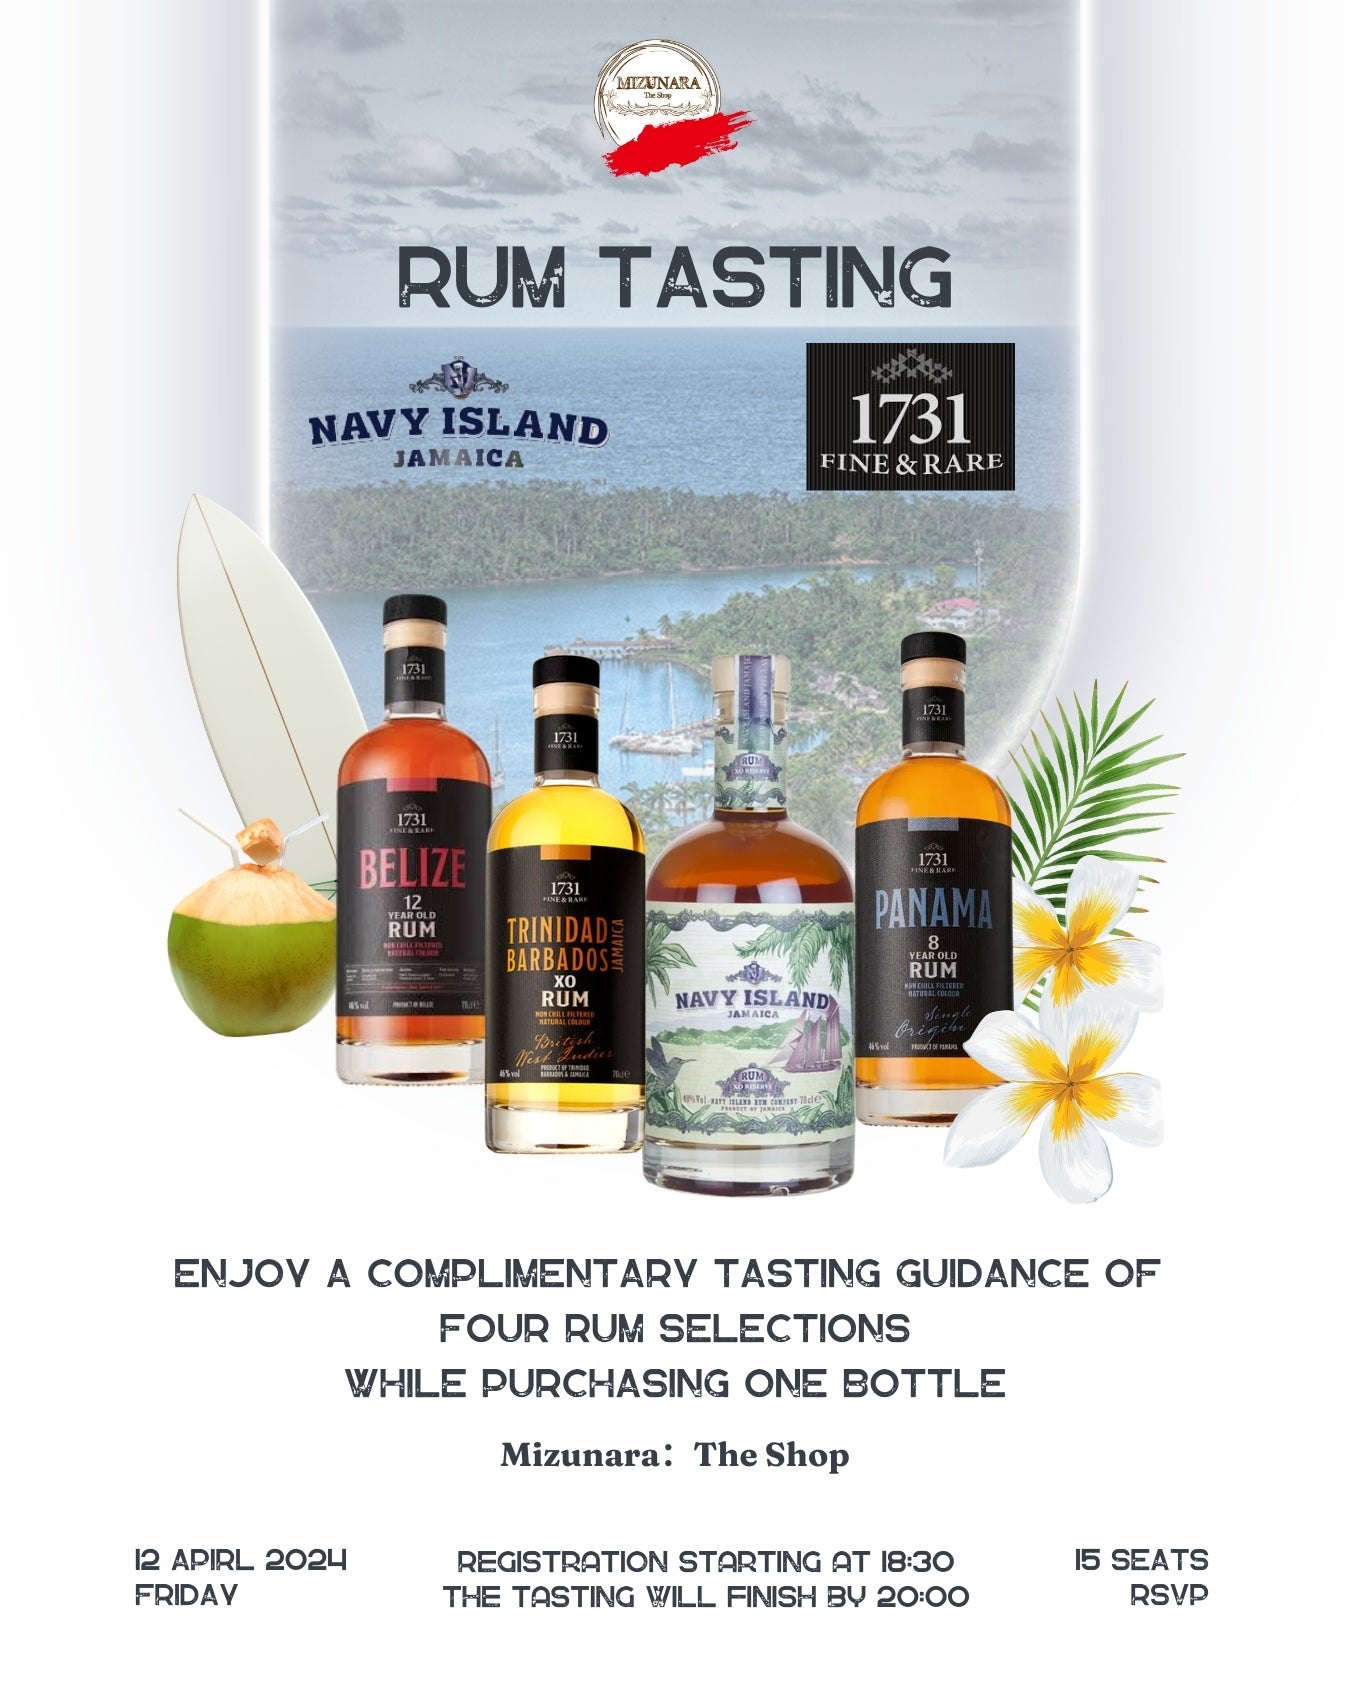 Discover RUM from Navy Island and 1731 Fine & Rare Rum - 12 April (Buy any bottle to participate the tasting event)